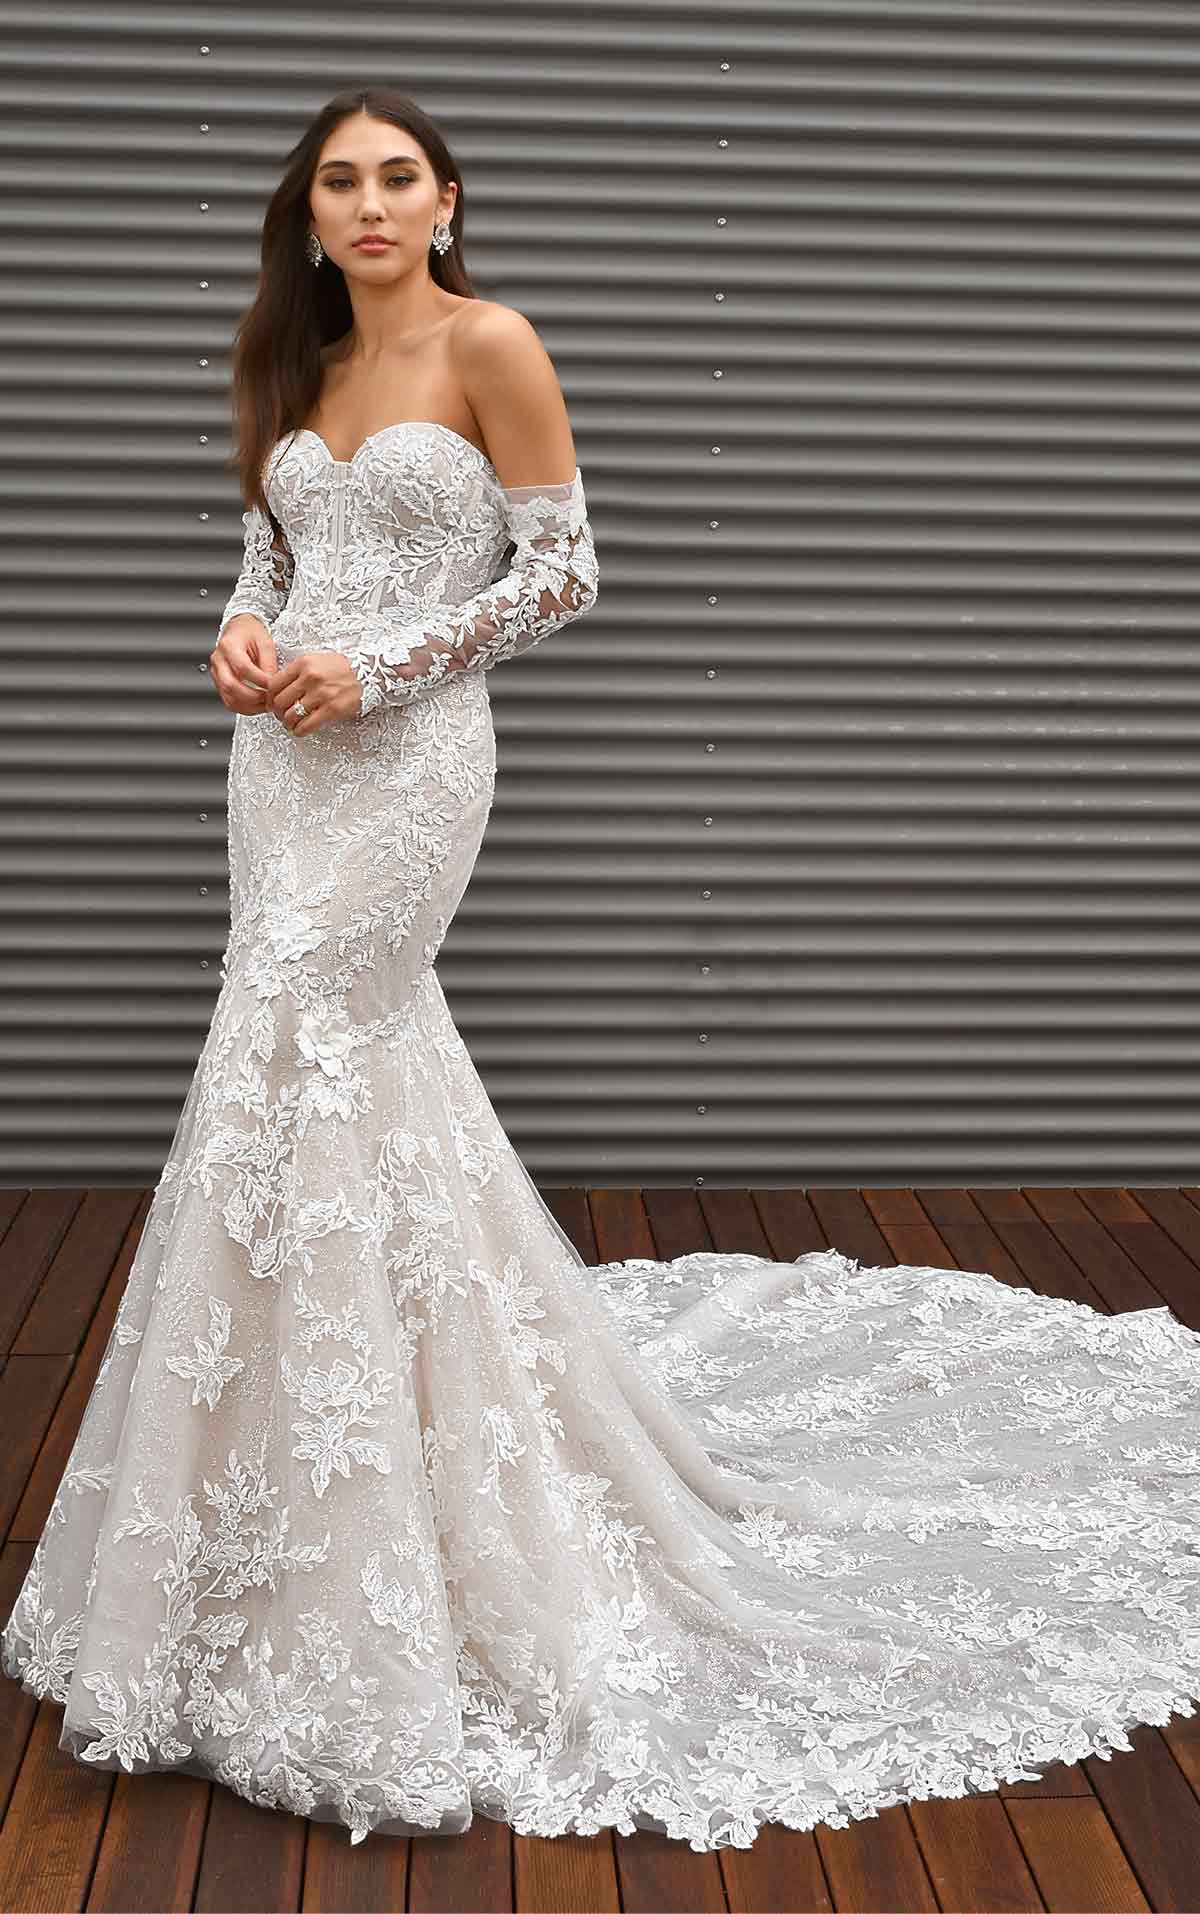 Long Sleeve Lace Fit And Flare Wedding Dress With Back Detail